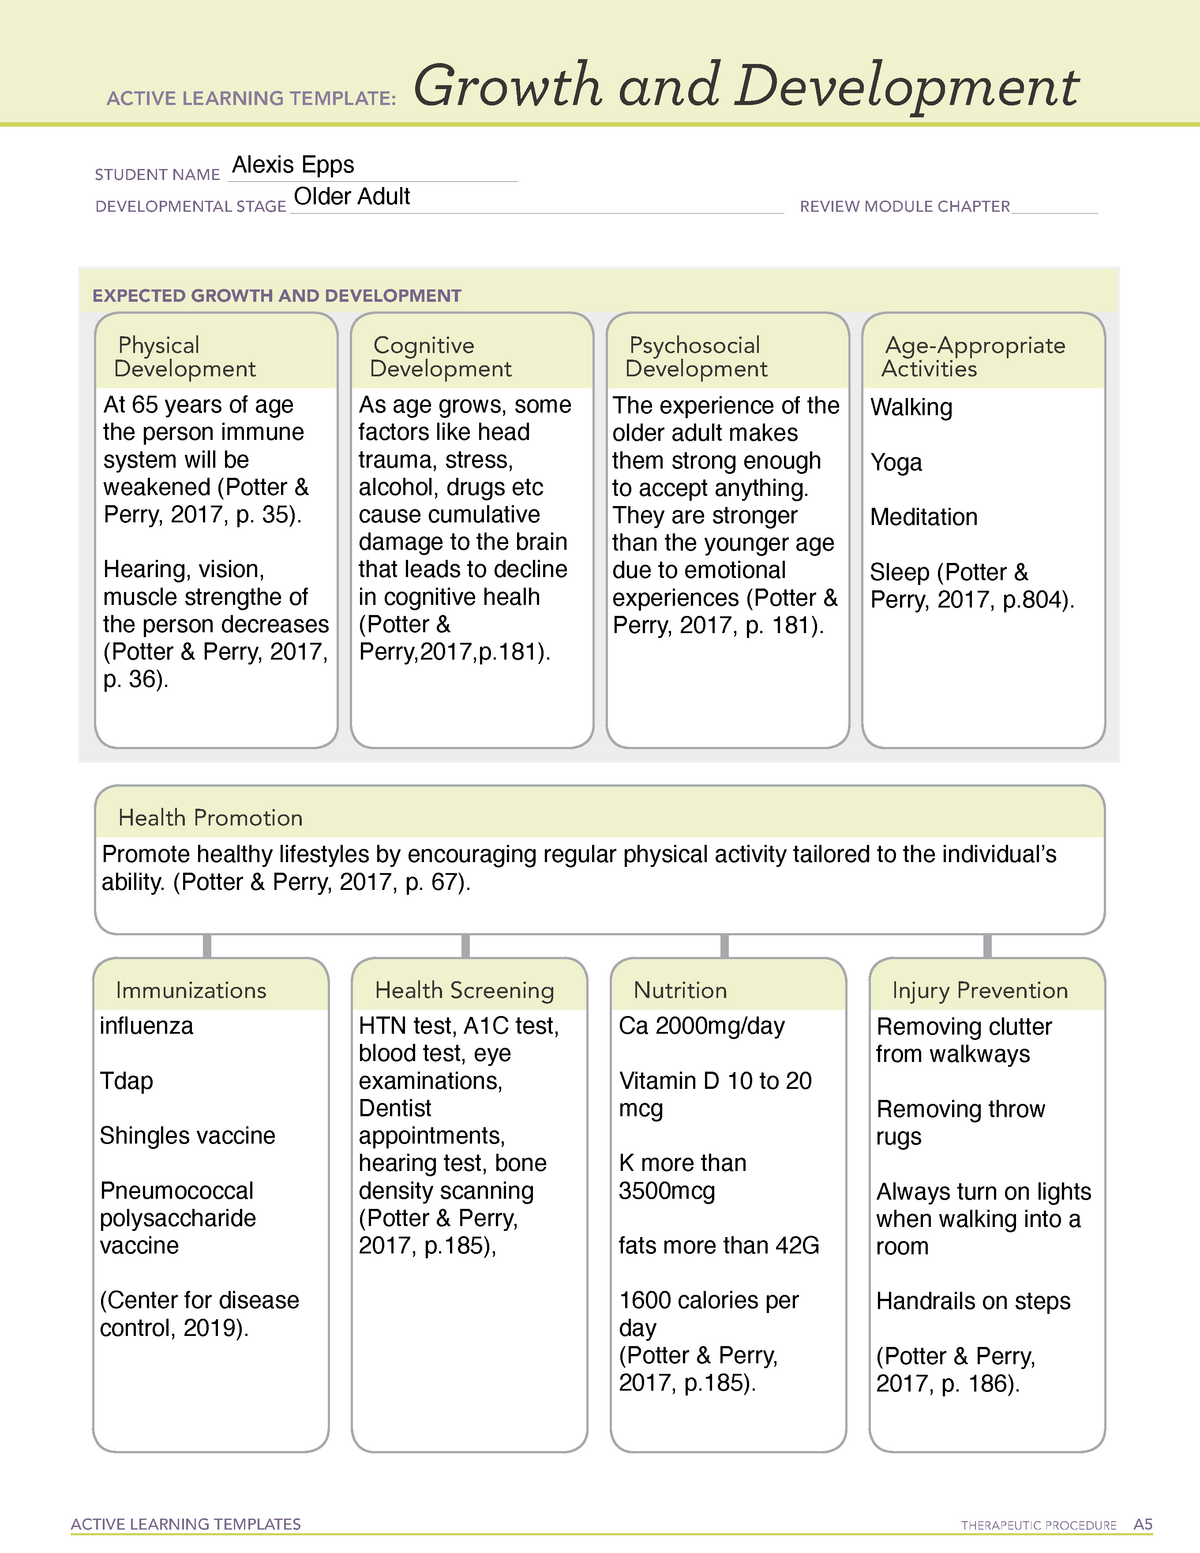 active-learning-template-gand-d-form-2-4-active-learning-templates